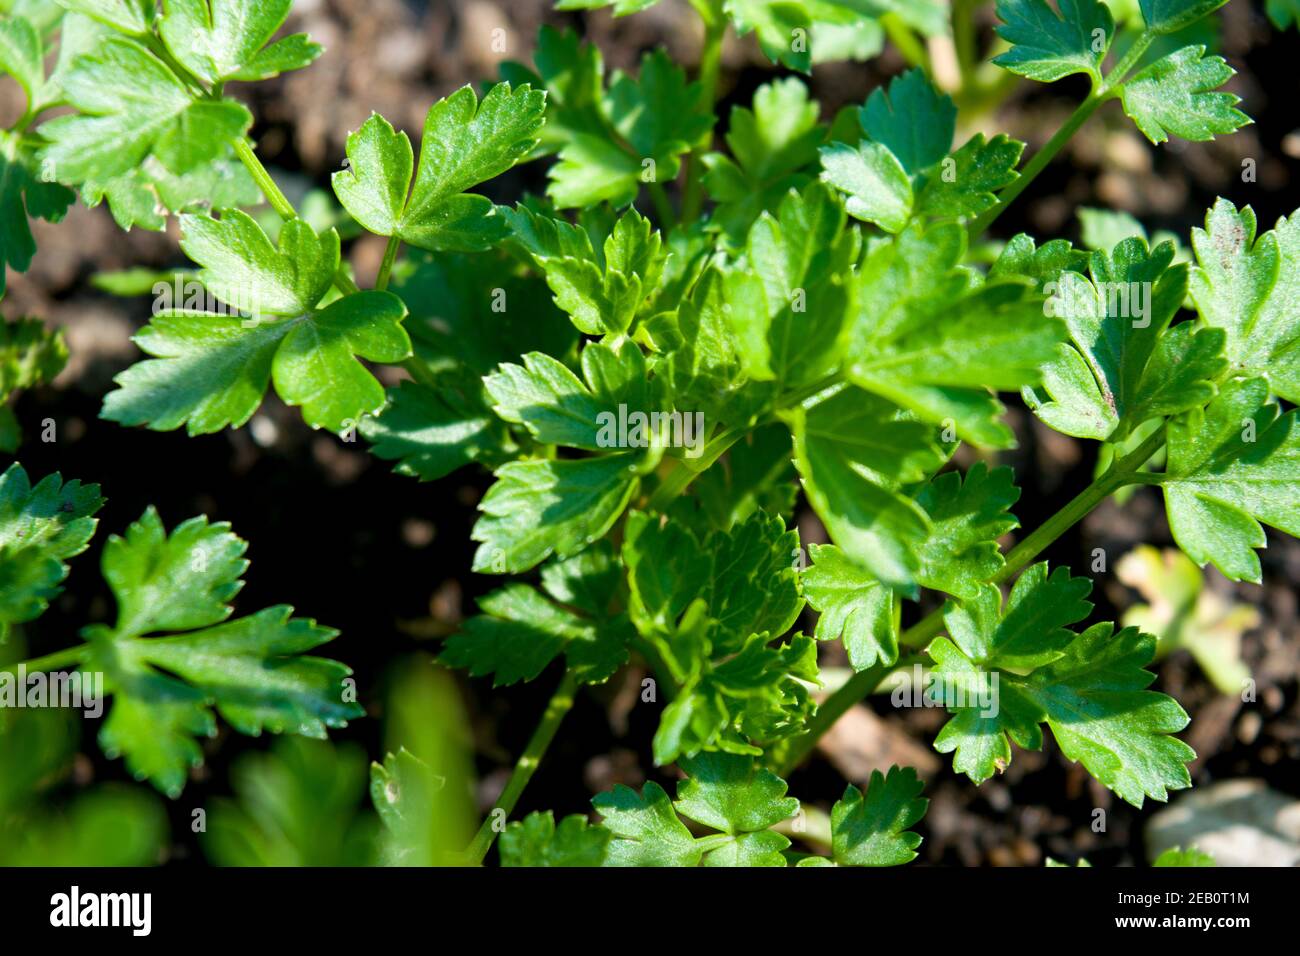 Young parsley bush growing in the garden. Parsley is a biennial plant with aromatic leaves that are either crinkly or flat and used as a culinary herb. Stock Photo